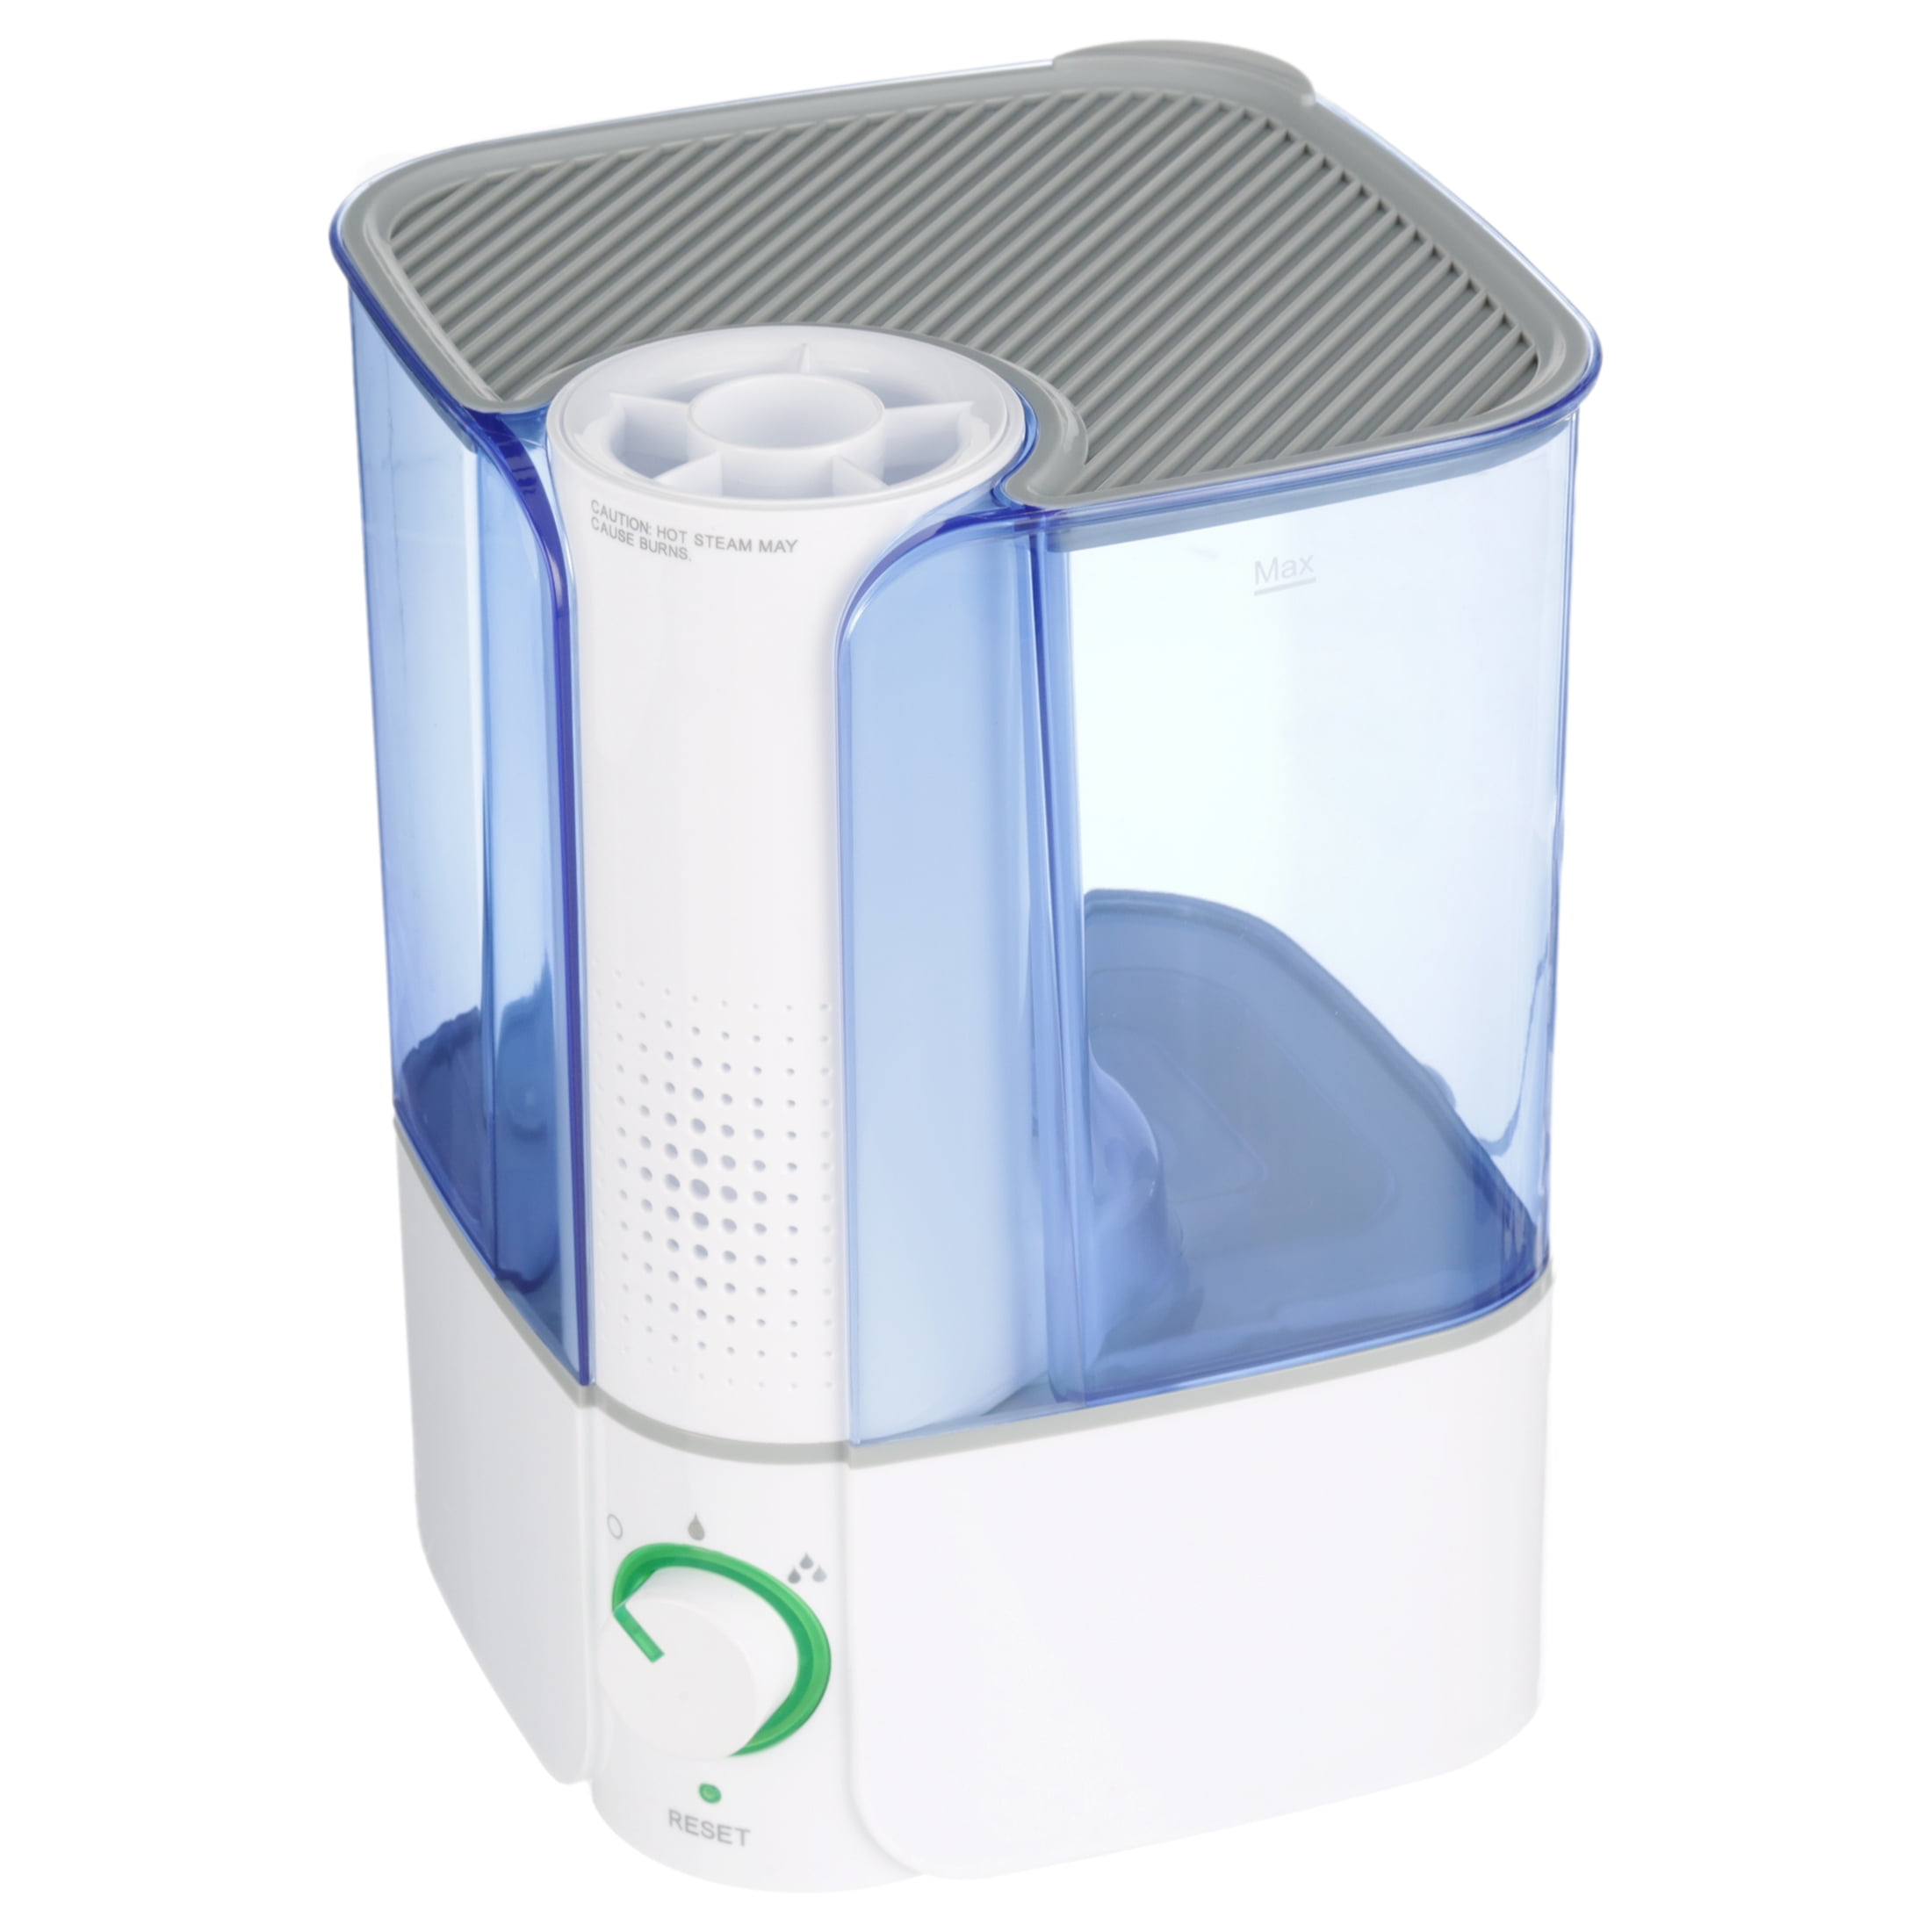 Equate Warm Mist Humidifier, Visible, Filter Free, White & Blue, Top Fill, 1.3 Gallon, Big Water Capacity